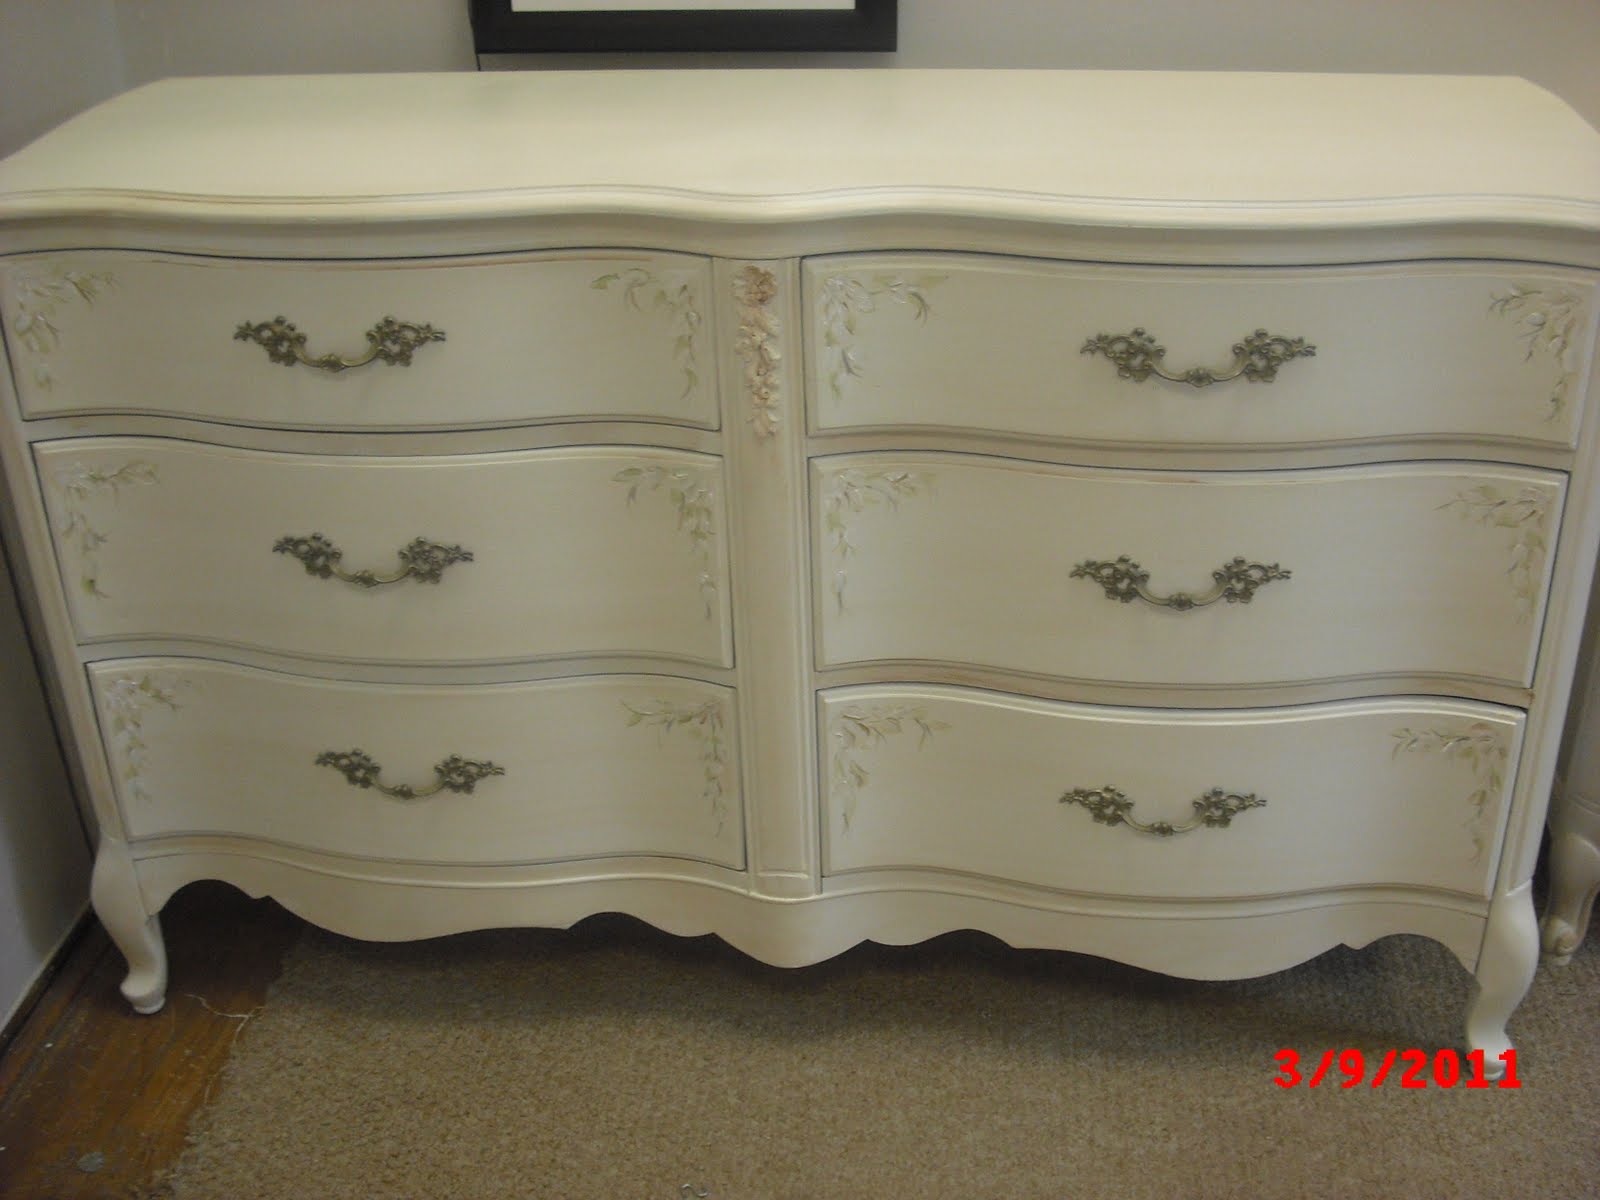 Handpainted Furniture Blog, Shabby Chic Vintage Painted Furniture ...